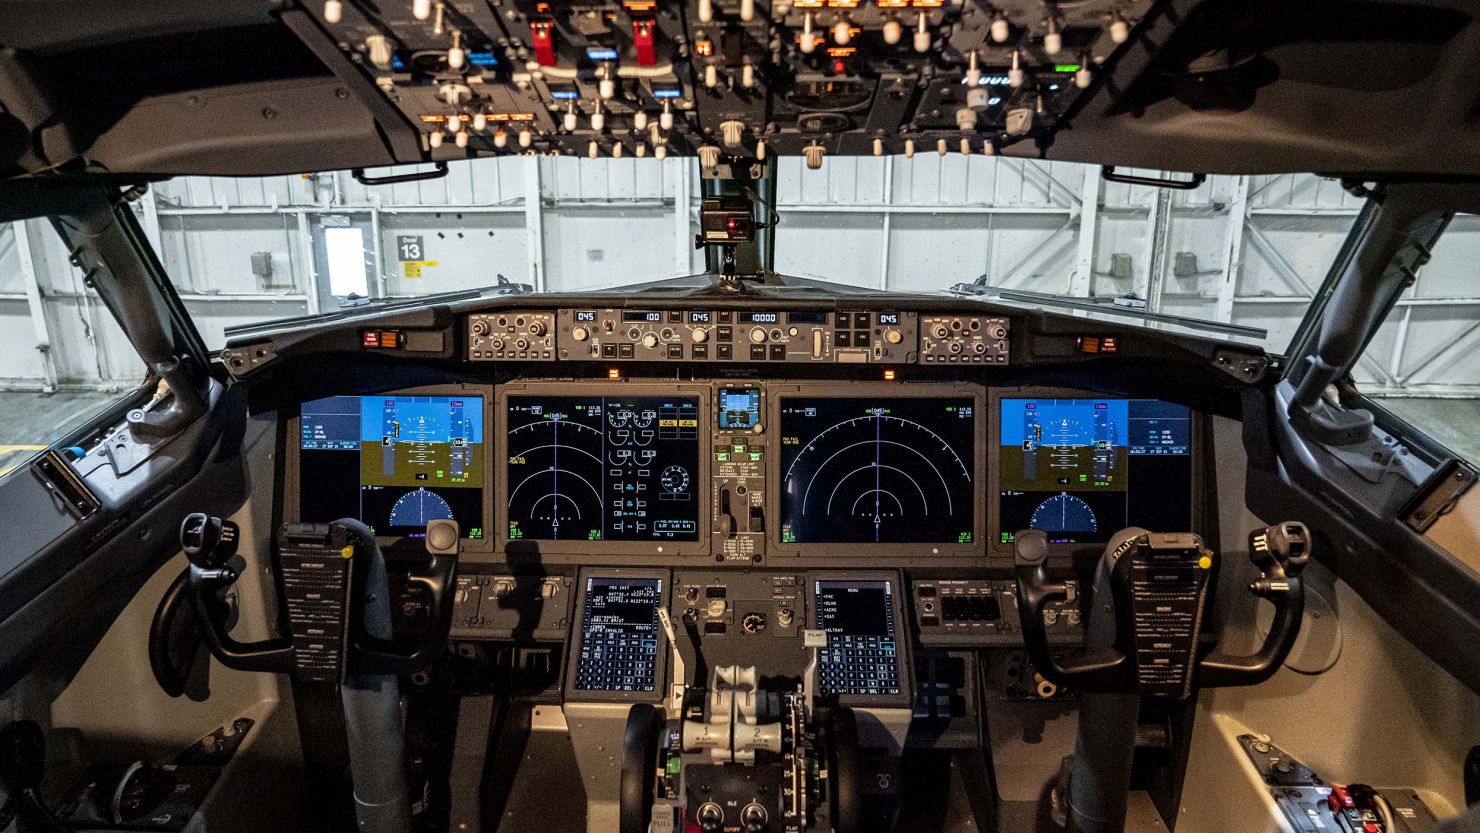 Touchscreen controls inside the cockpit of an Alaska Airlines Boeing 737-9 aircraft during an event showcasing the latest updates in the ecoDemonstrator program at Boeing Field in Seattle, Washington, U.S., on Monday, Sept. 27, 2021. Boeing Co. is studying how to incorporate sustainability improvements into aircraft design, production, maintenance and recycling in preparation for its next commercial airliner, said Mike Sinnett, vice president of product development for Boeing Commercial Airplanes. Photographer: David Ryder/Bloomberg via Getty Images